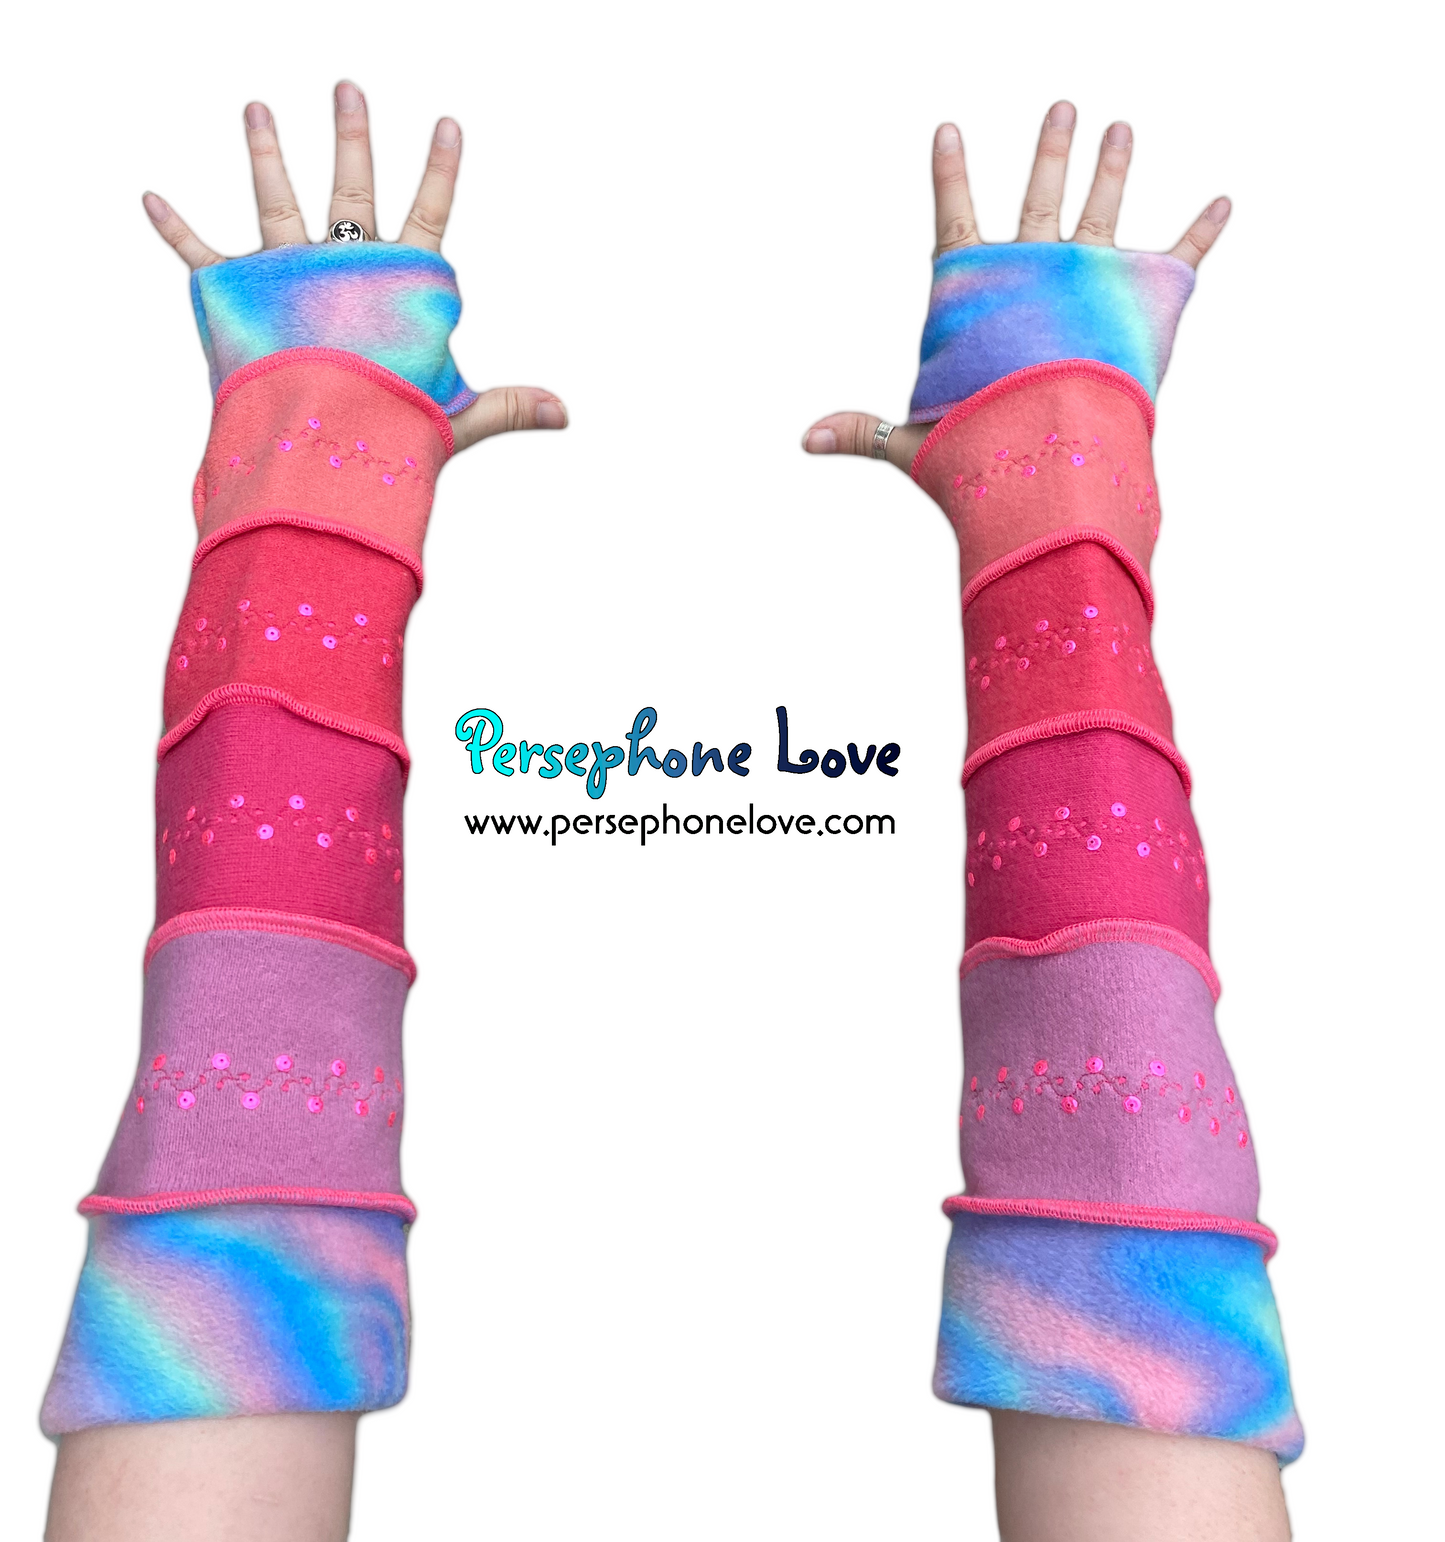 Katwise-inspired felted 100% cashmere arm warmers-1572